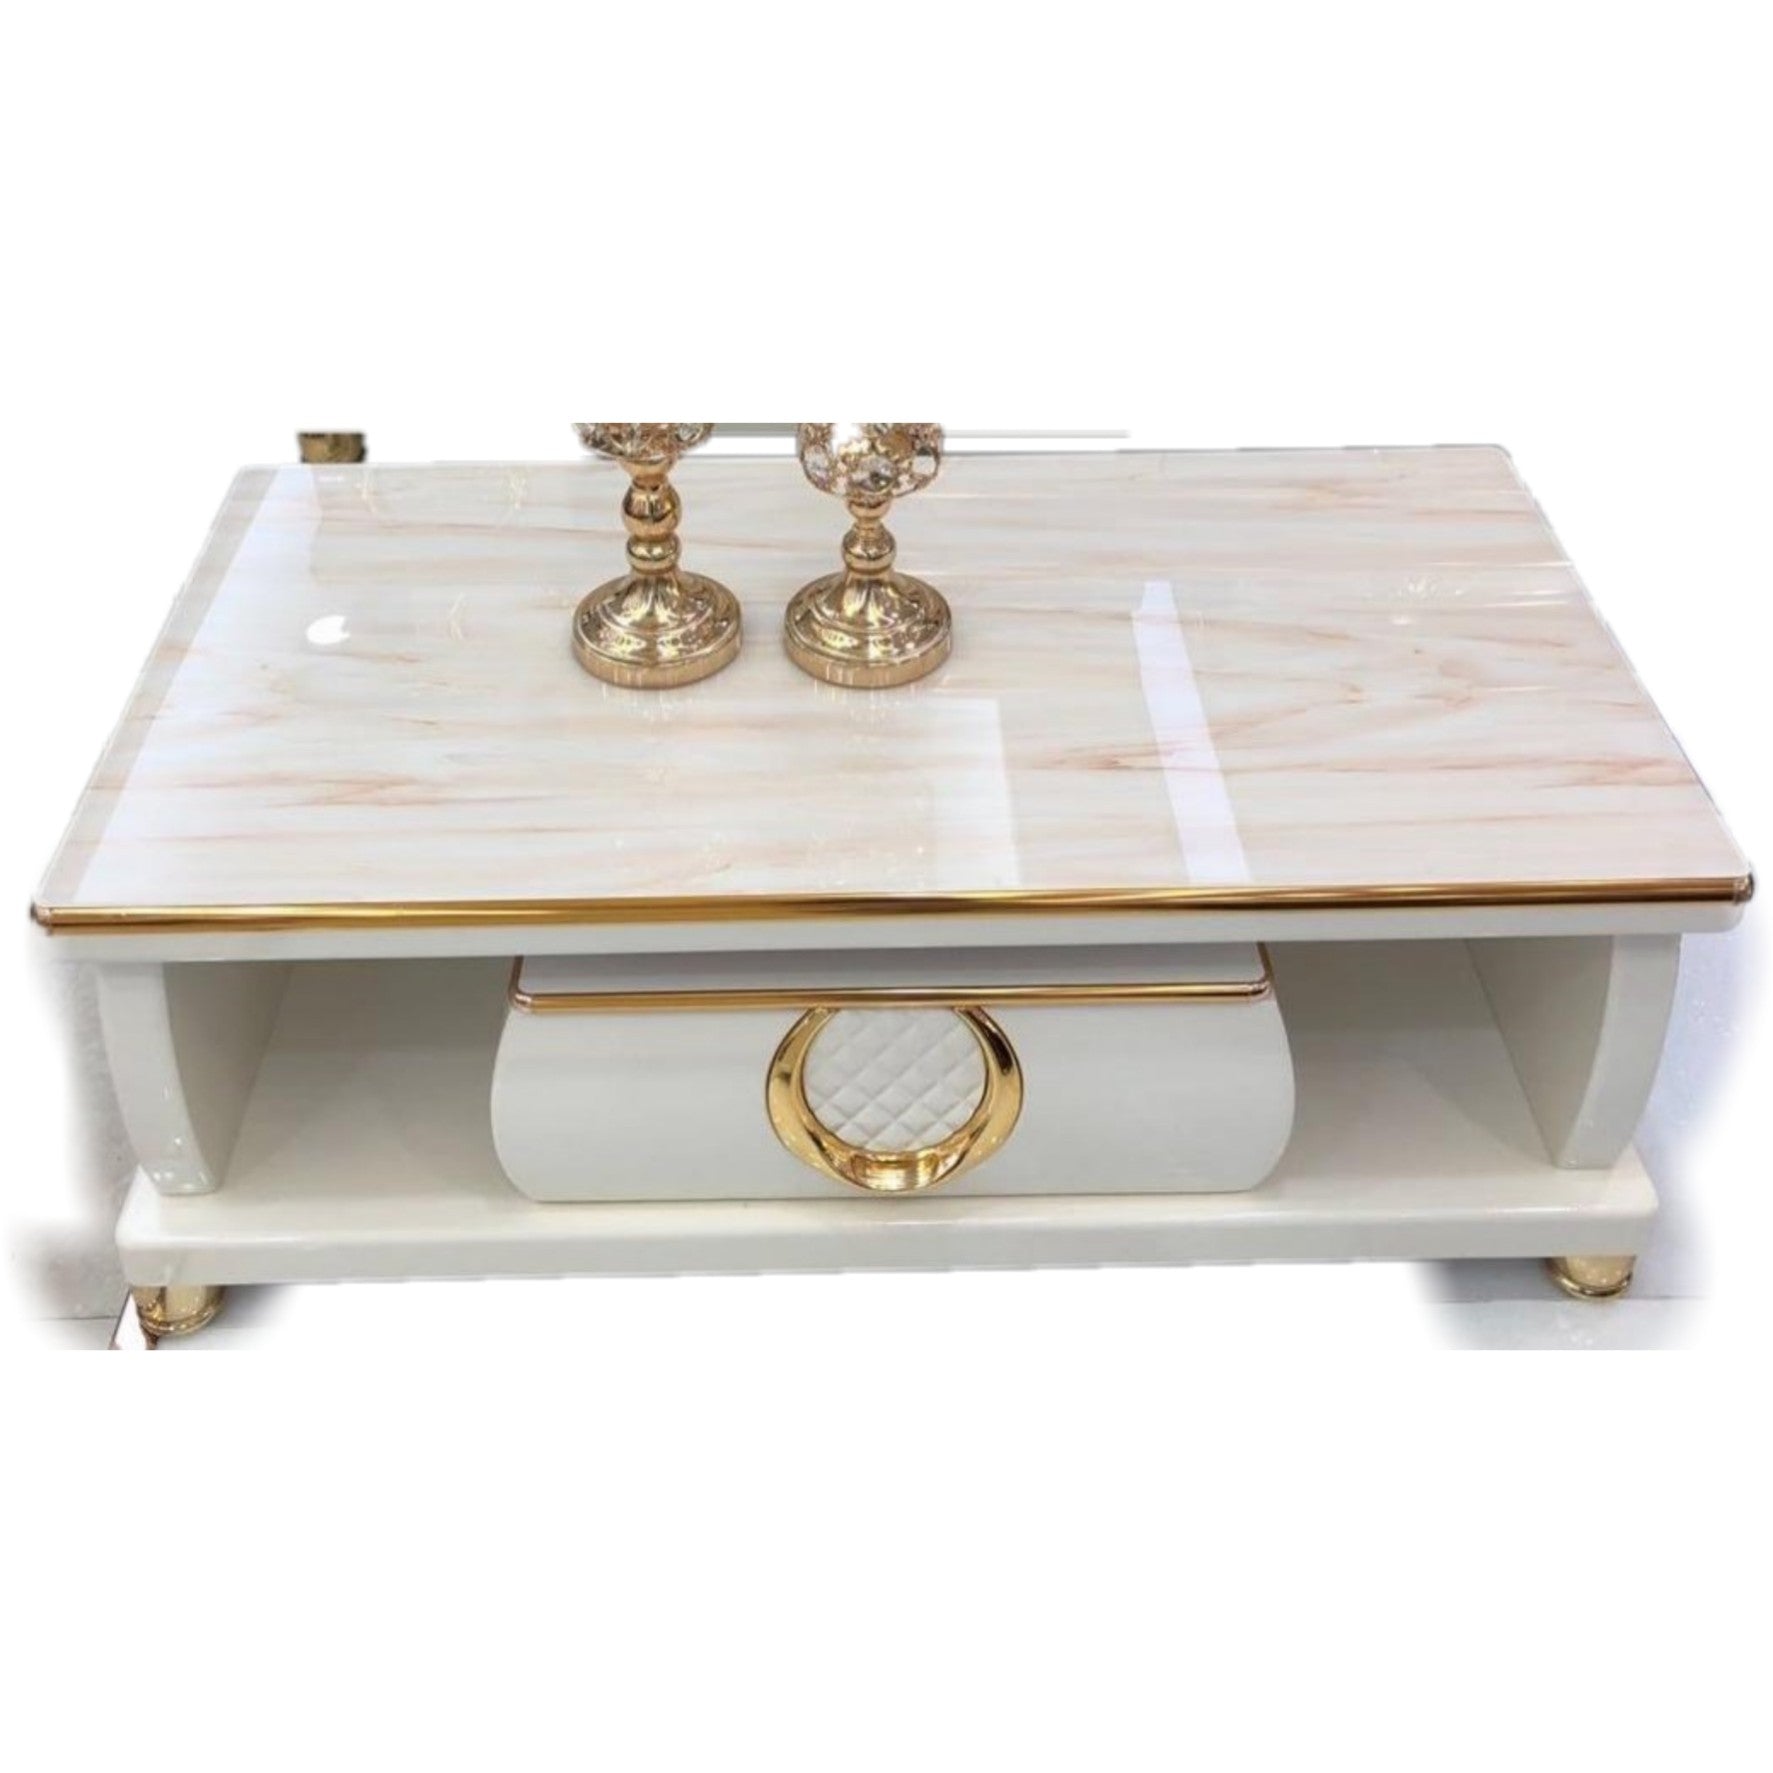 Exquisite Center Table With Cabinet 18 freeshipping - Zit Electronics Store